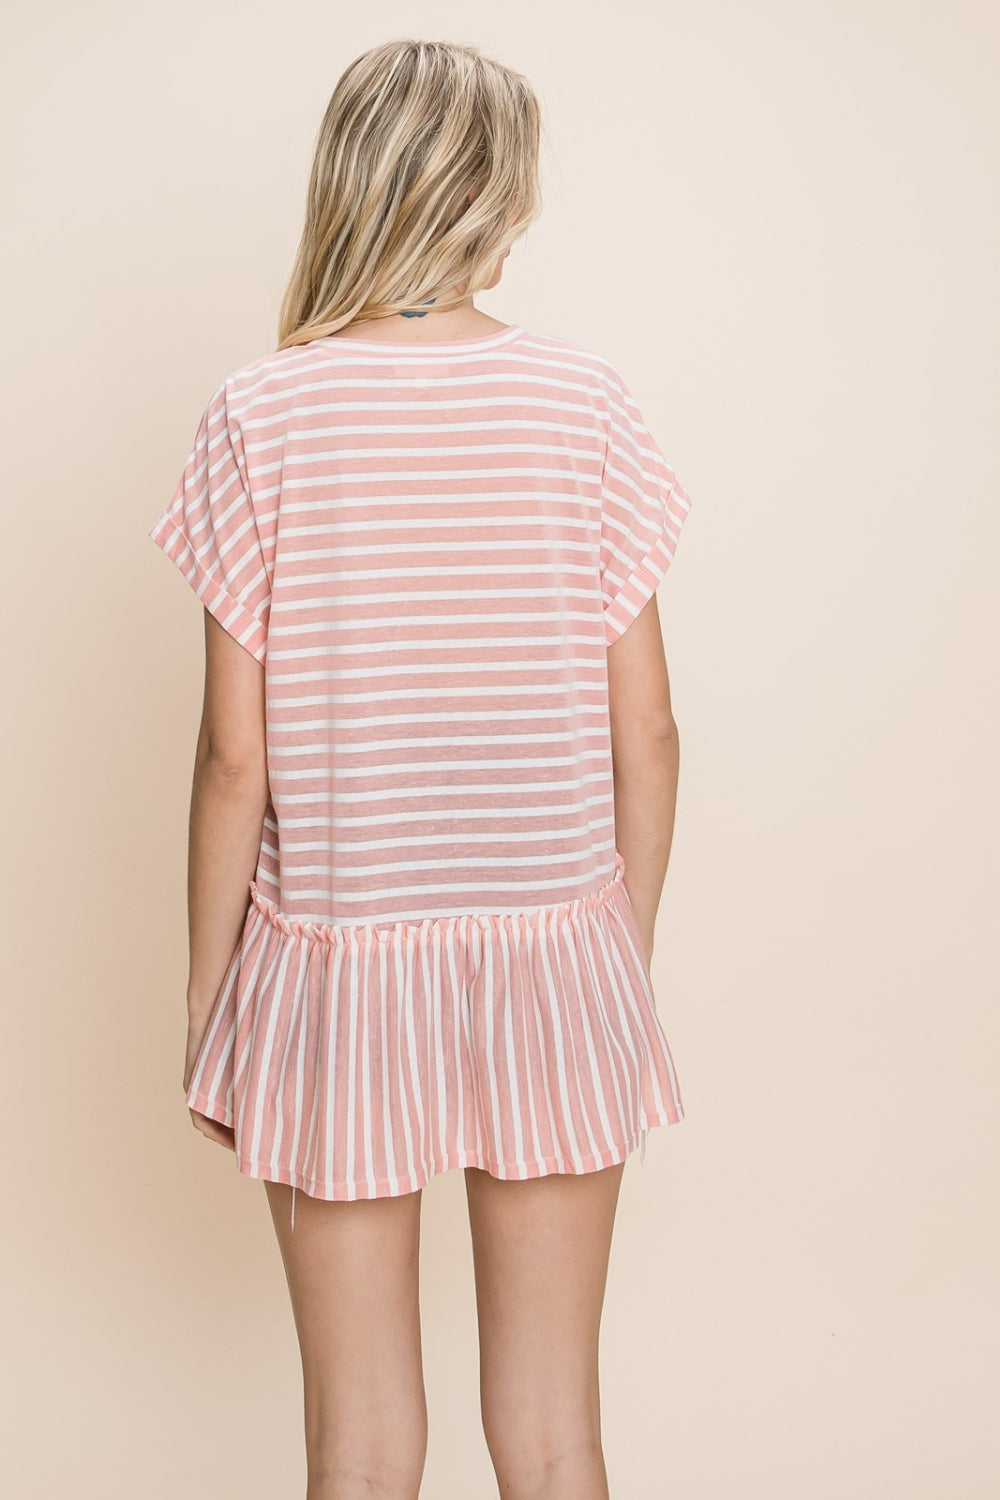 Cotton Bleu by Nu Label Striped Ruffled Short Sleeve Top Trendsi